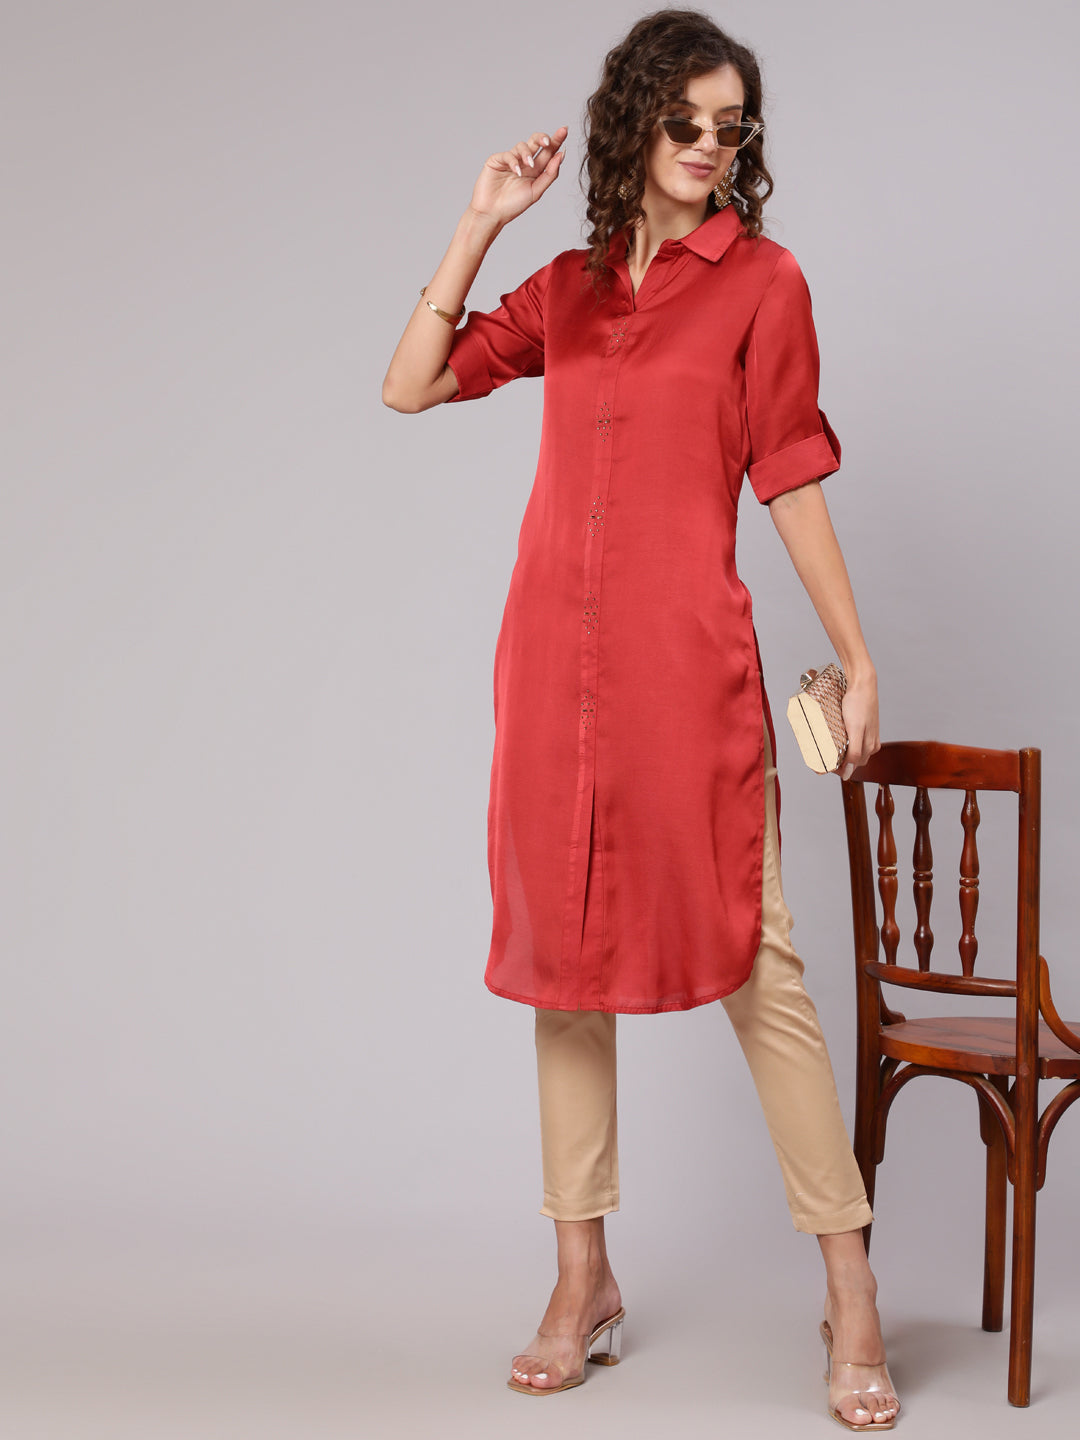 Red Silk Fabric Embellished Shirt With Roll-Up Elbow Sleeves